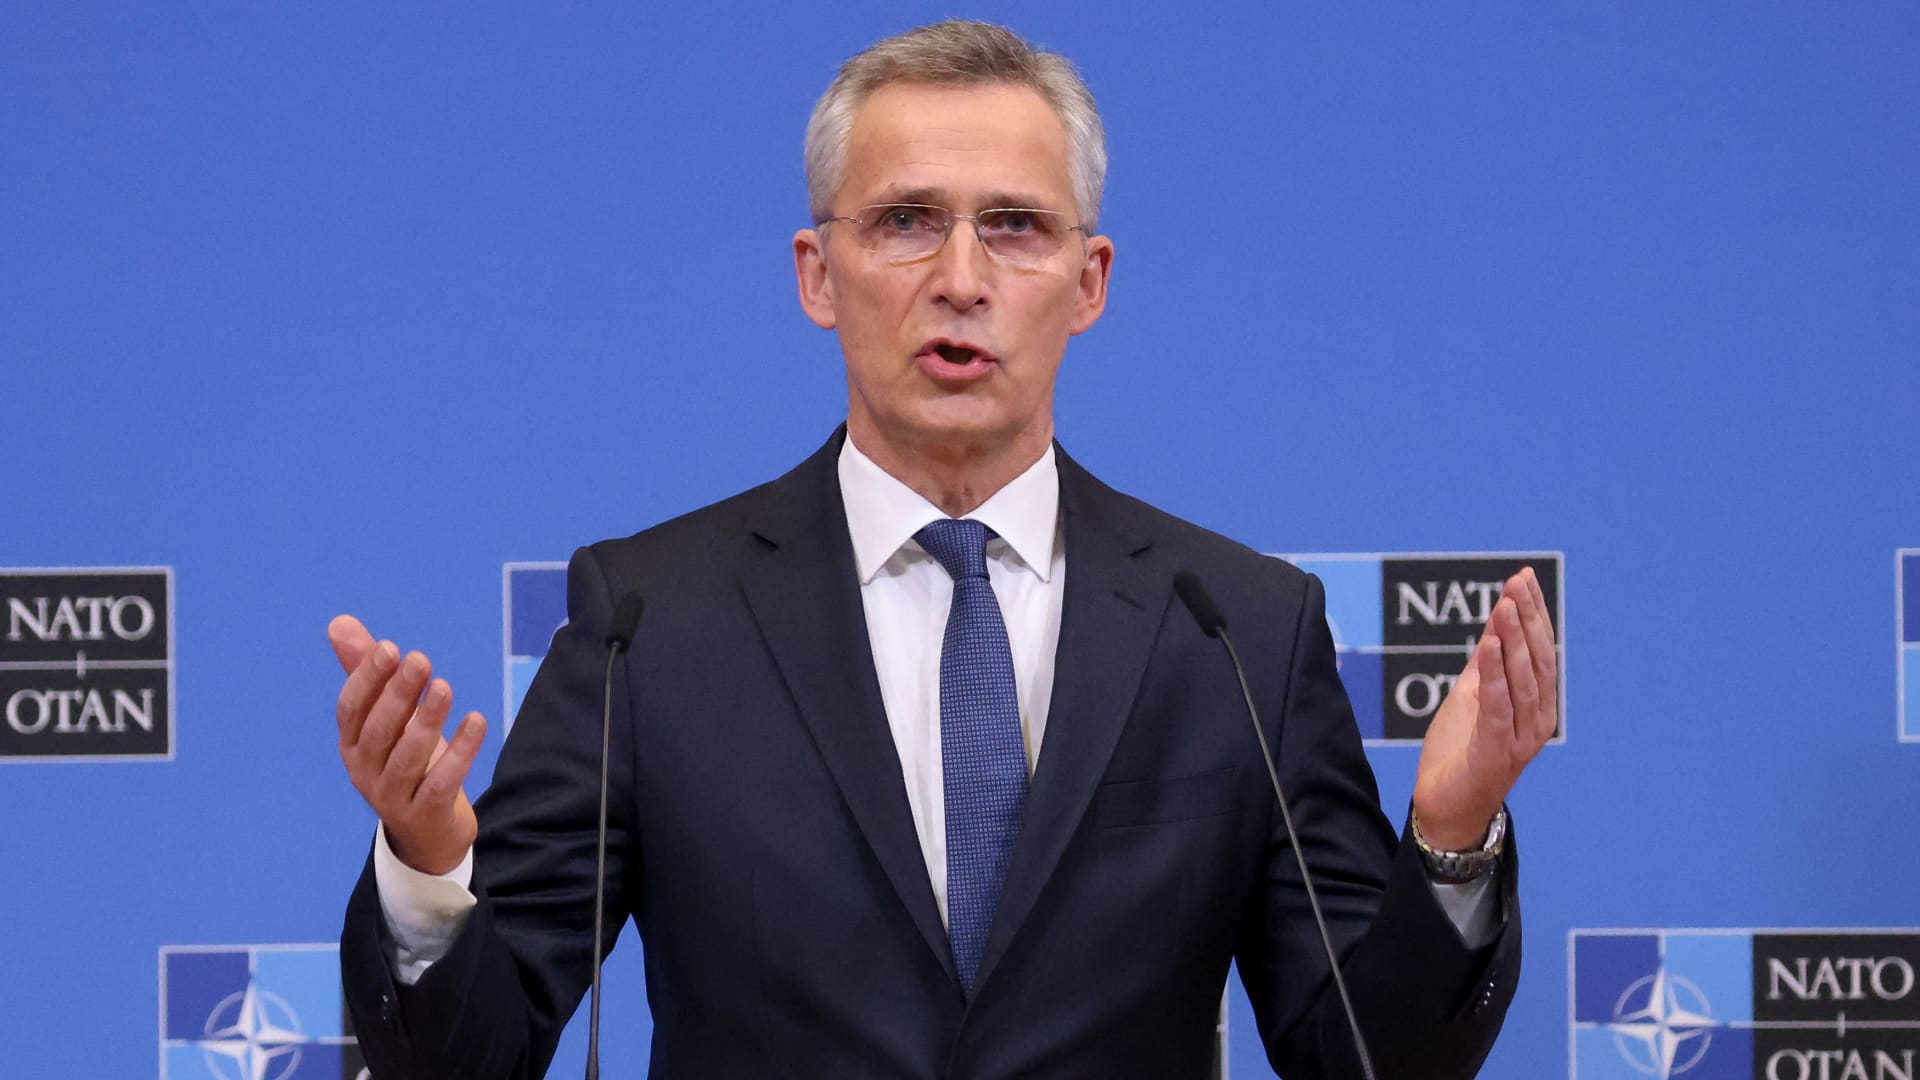 NATO Secretary-General Jens Stoltenberg speaks as he holds a news conference following an extraordinary meeting of the NATO-Ukraine Commission, in Brussels, Belgium, February 22, 2022.